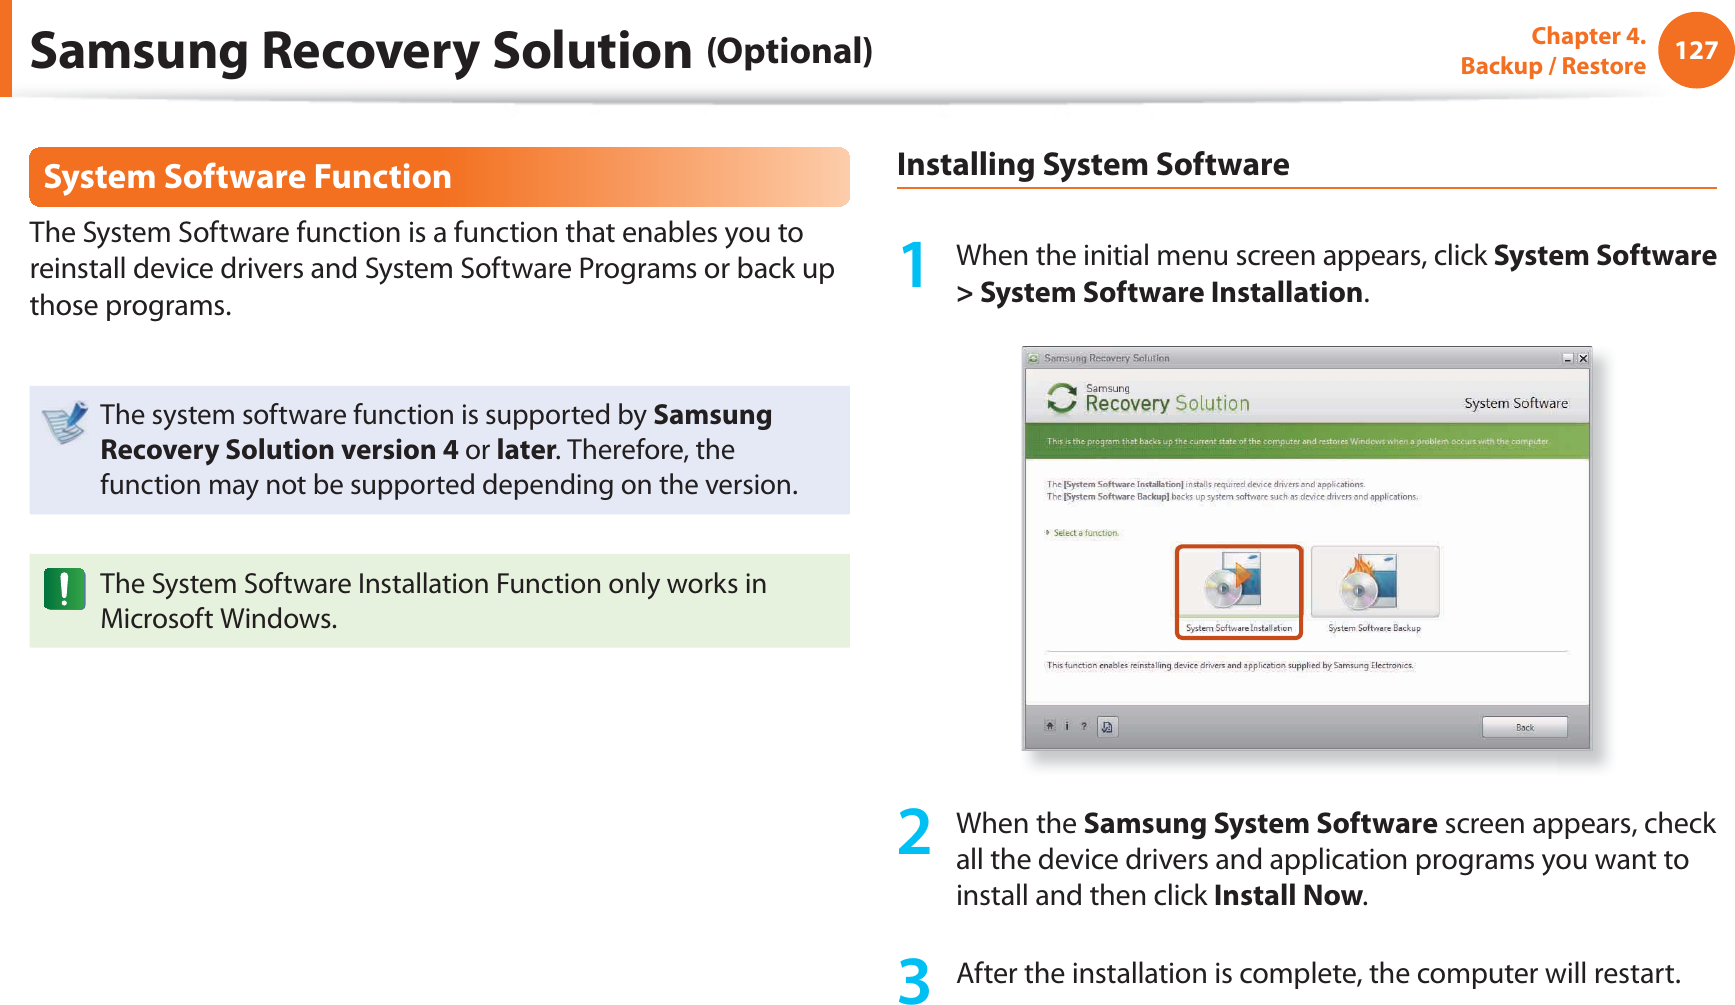 127Chapter 4.  Backup / RestoreSystem Software FunctionThe System Software function is a function that enables you to reinstall device drivers and System Software Programs or back up those programs. The system software function is supported by Samsung Recovery Solution version 4 or later. Therefore, the function may not be supported depending on the version.The System Software Installation Function only works in Microsoft Windows.Installing System Software1  When the initial menu screen appears, click System Software &gt; System Software Installation.2 When the Samsung System Software screen appears, check all the device drivers and application programs you want to install and then click Install Now.3  After the installation is complete, the computer will restart.Samsung Recovery Solution (Optional)